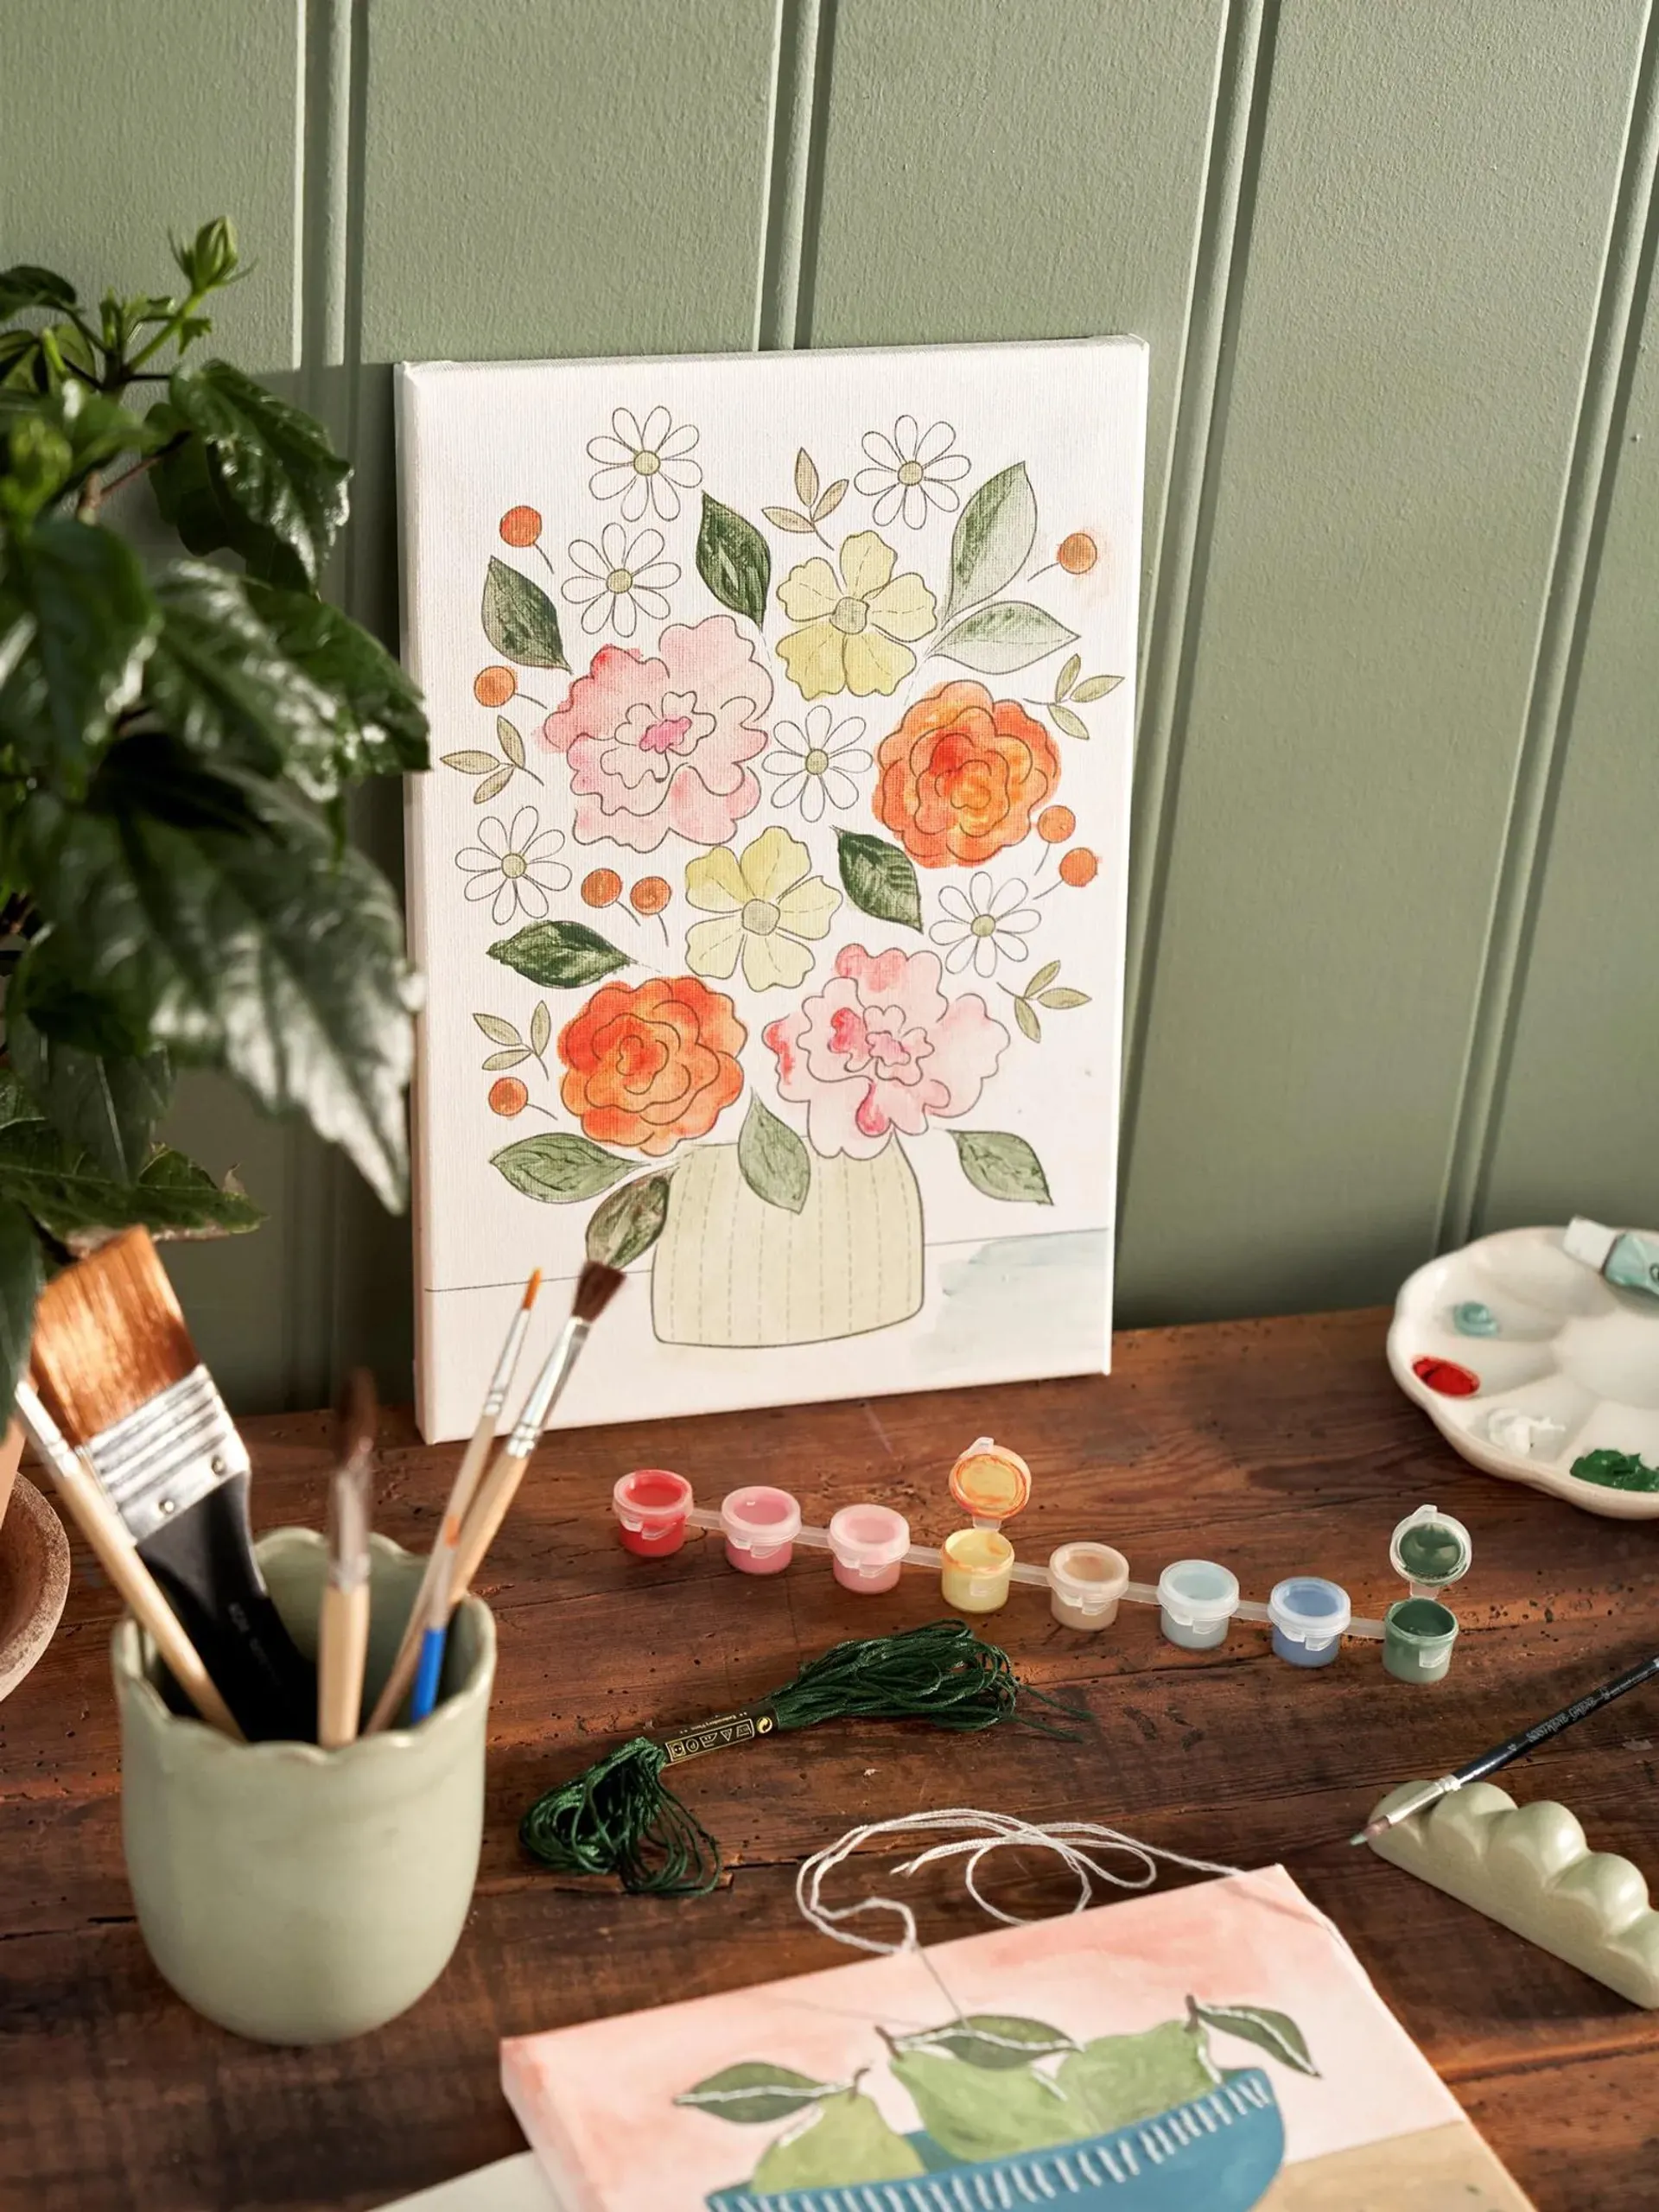 Painting and embroidery kit